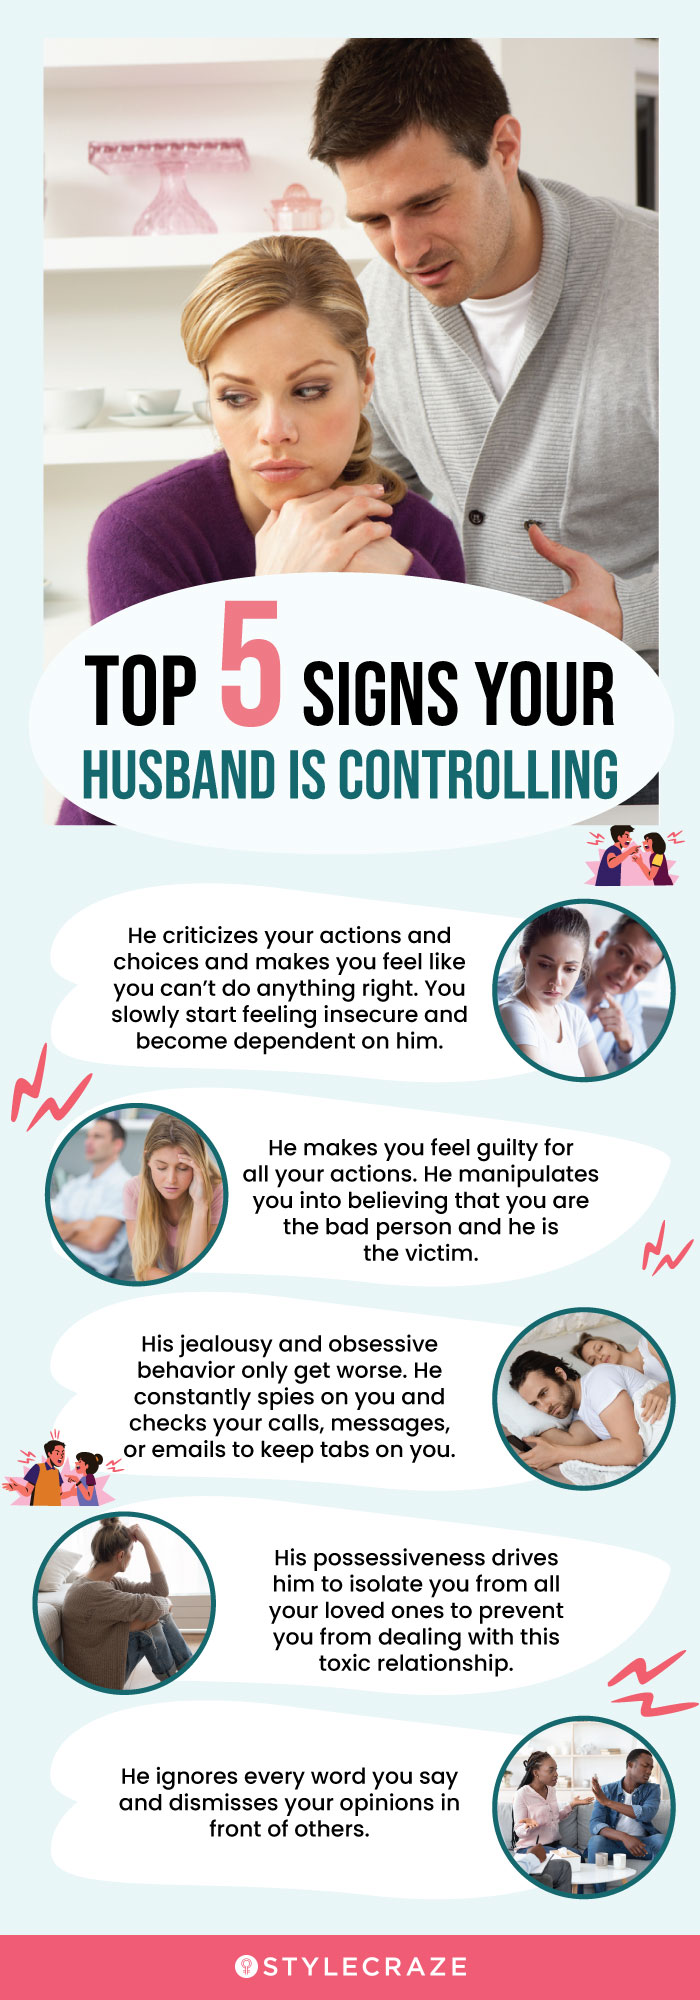 top 5 signs your husband is controlling (infographic)